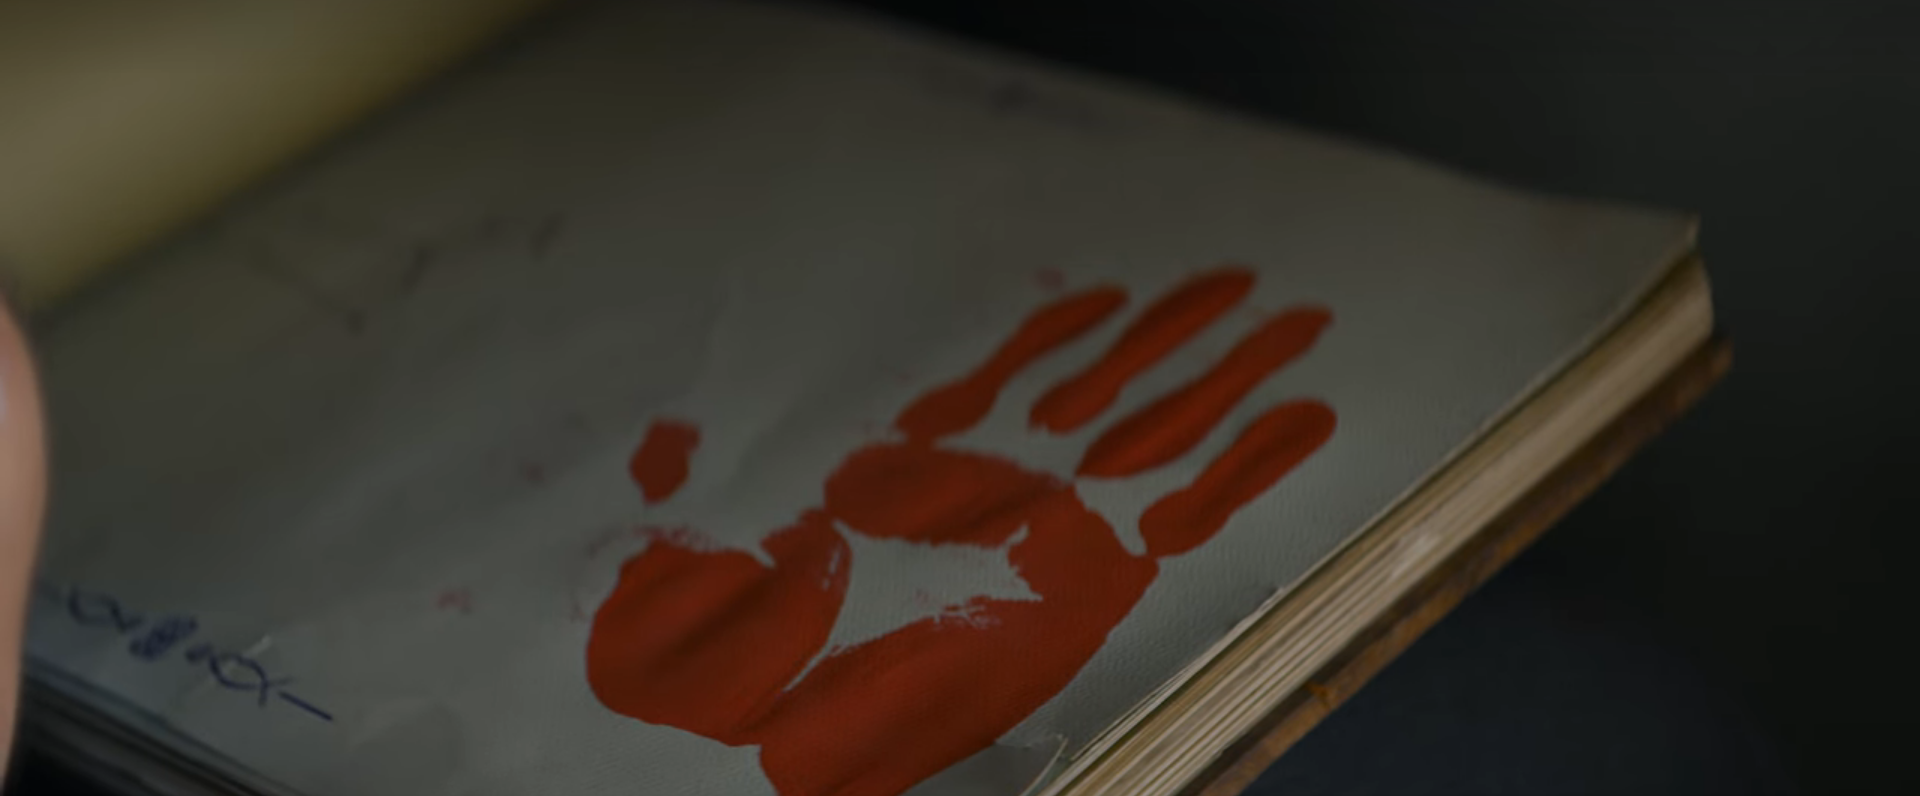 A notebook with handprints